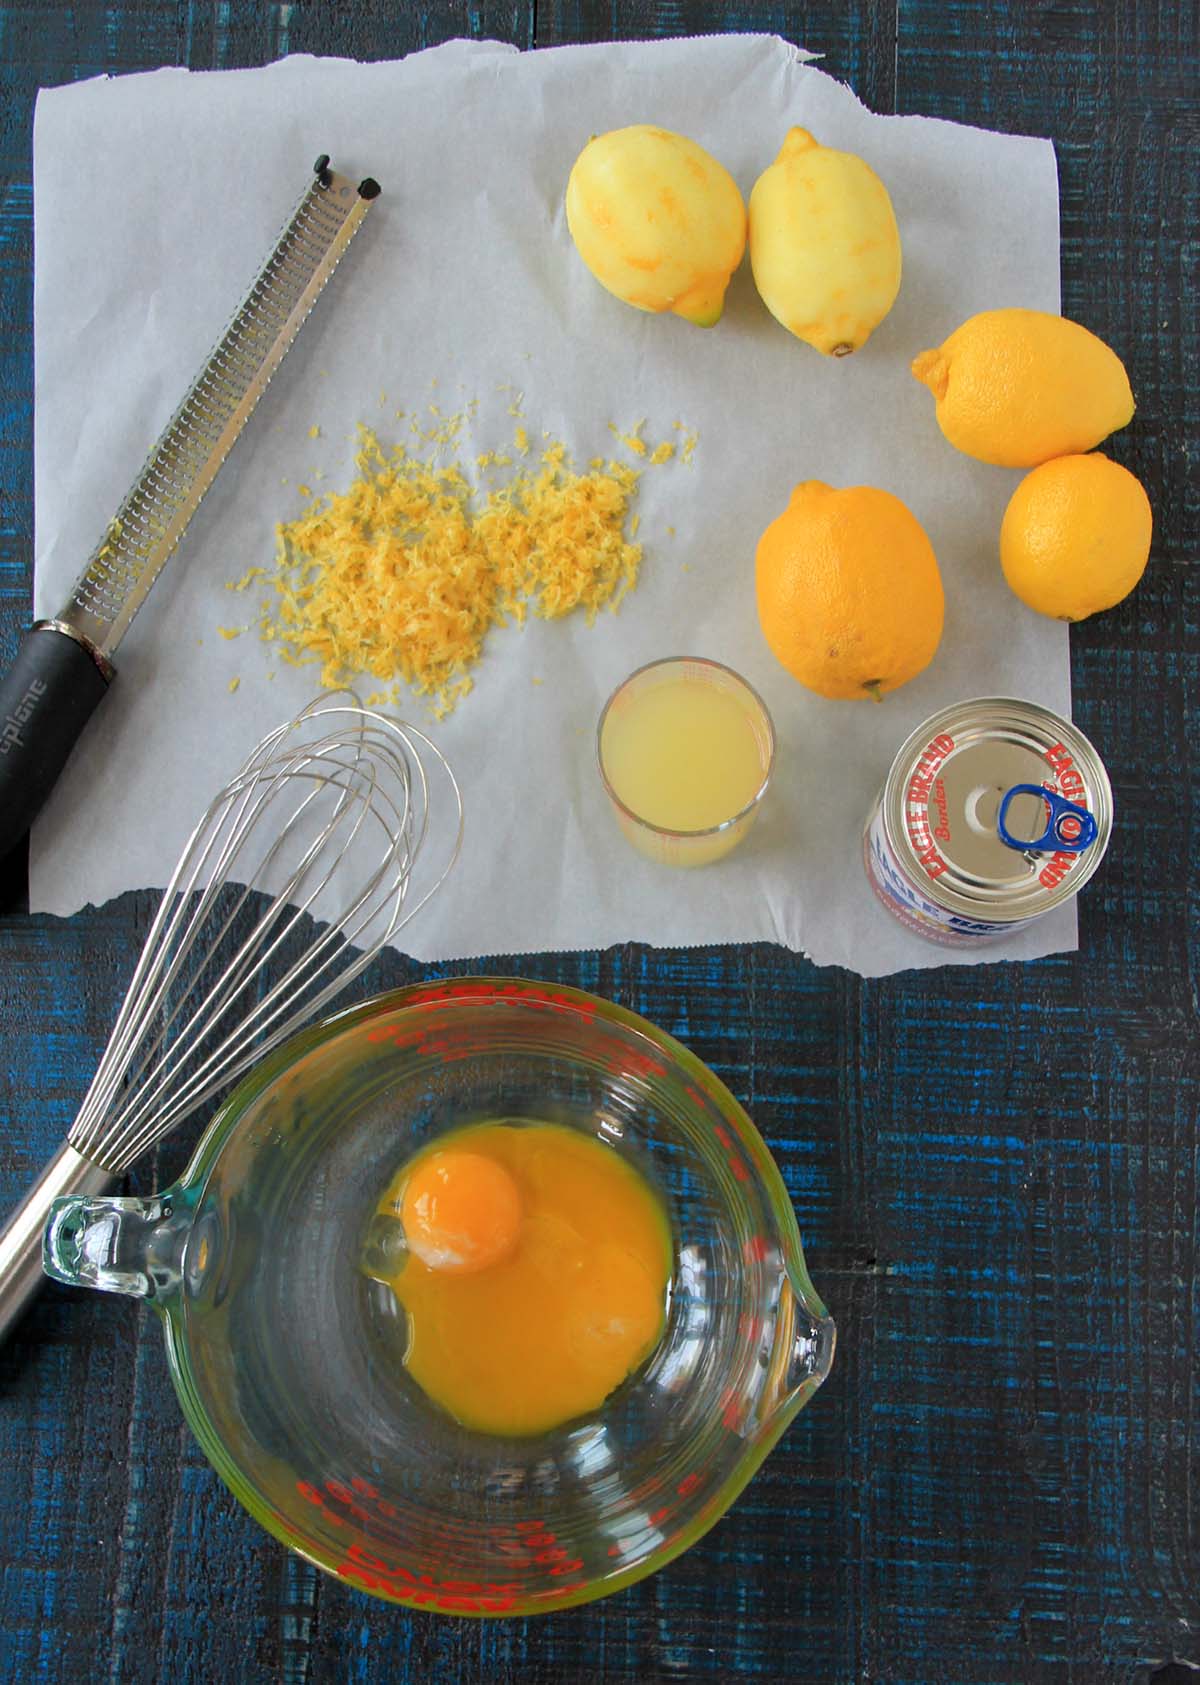 Ingredients for a lemon-based recipe arranged on a blue tablecloth, including lemons, zest, juice, an egg, and a whisk.